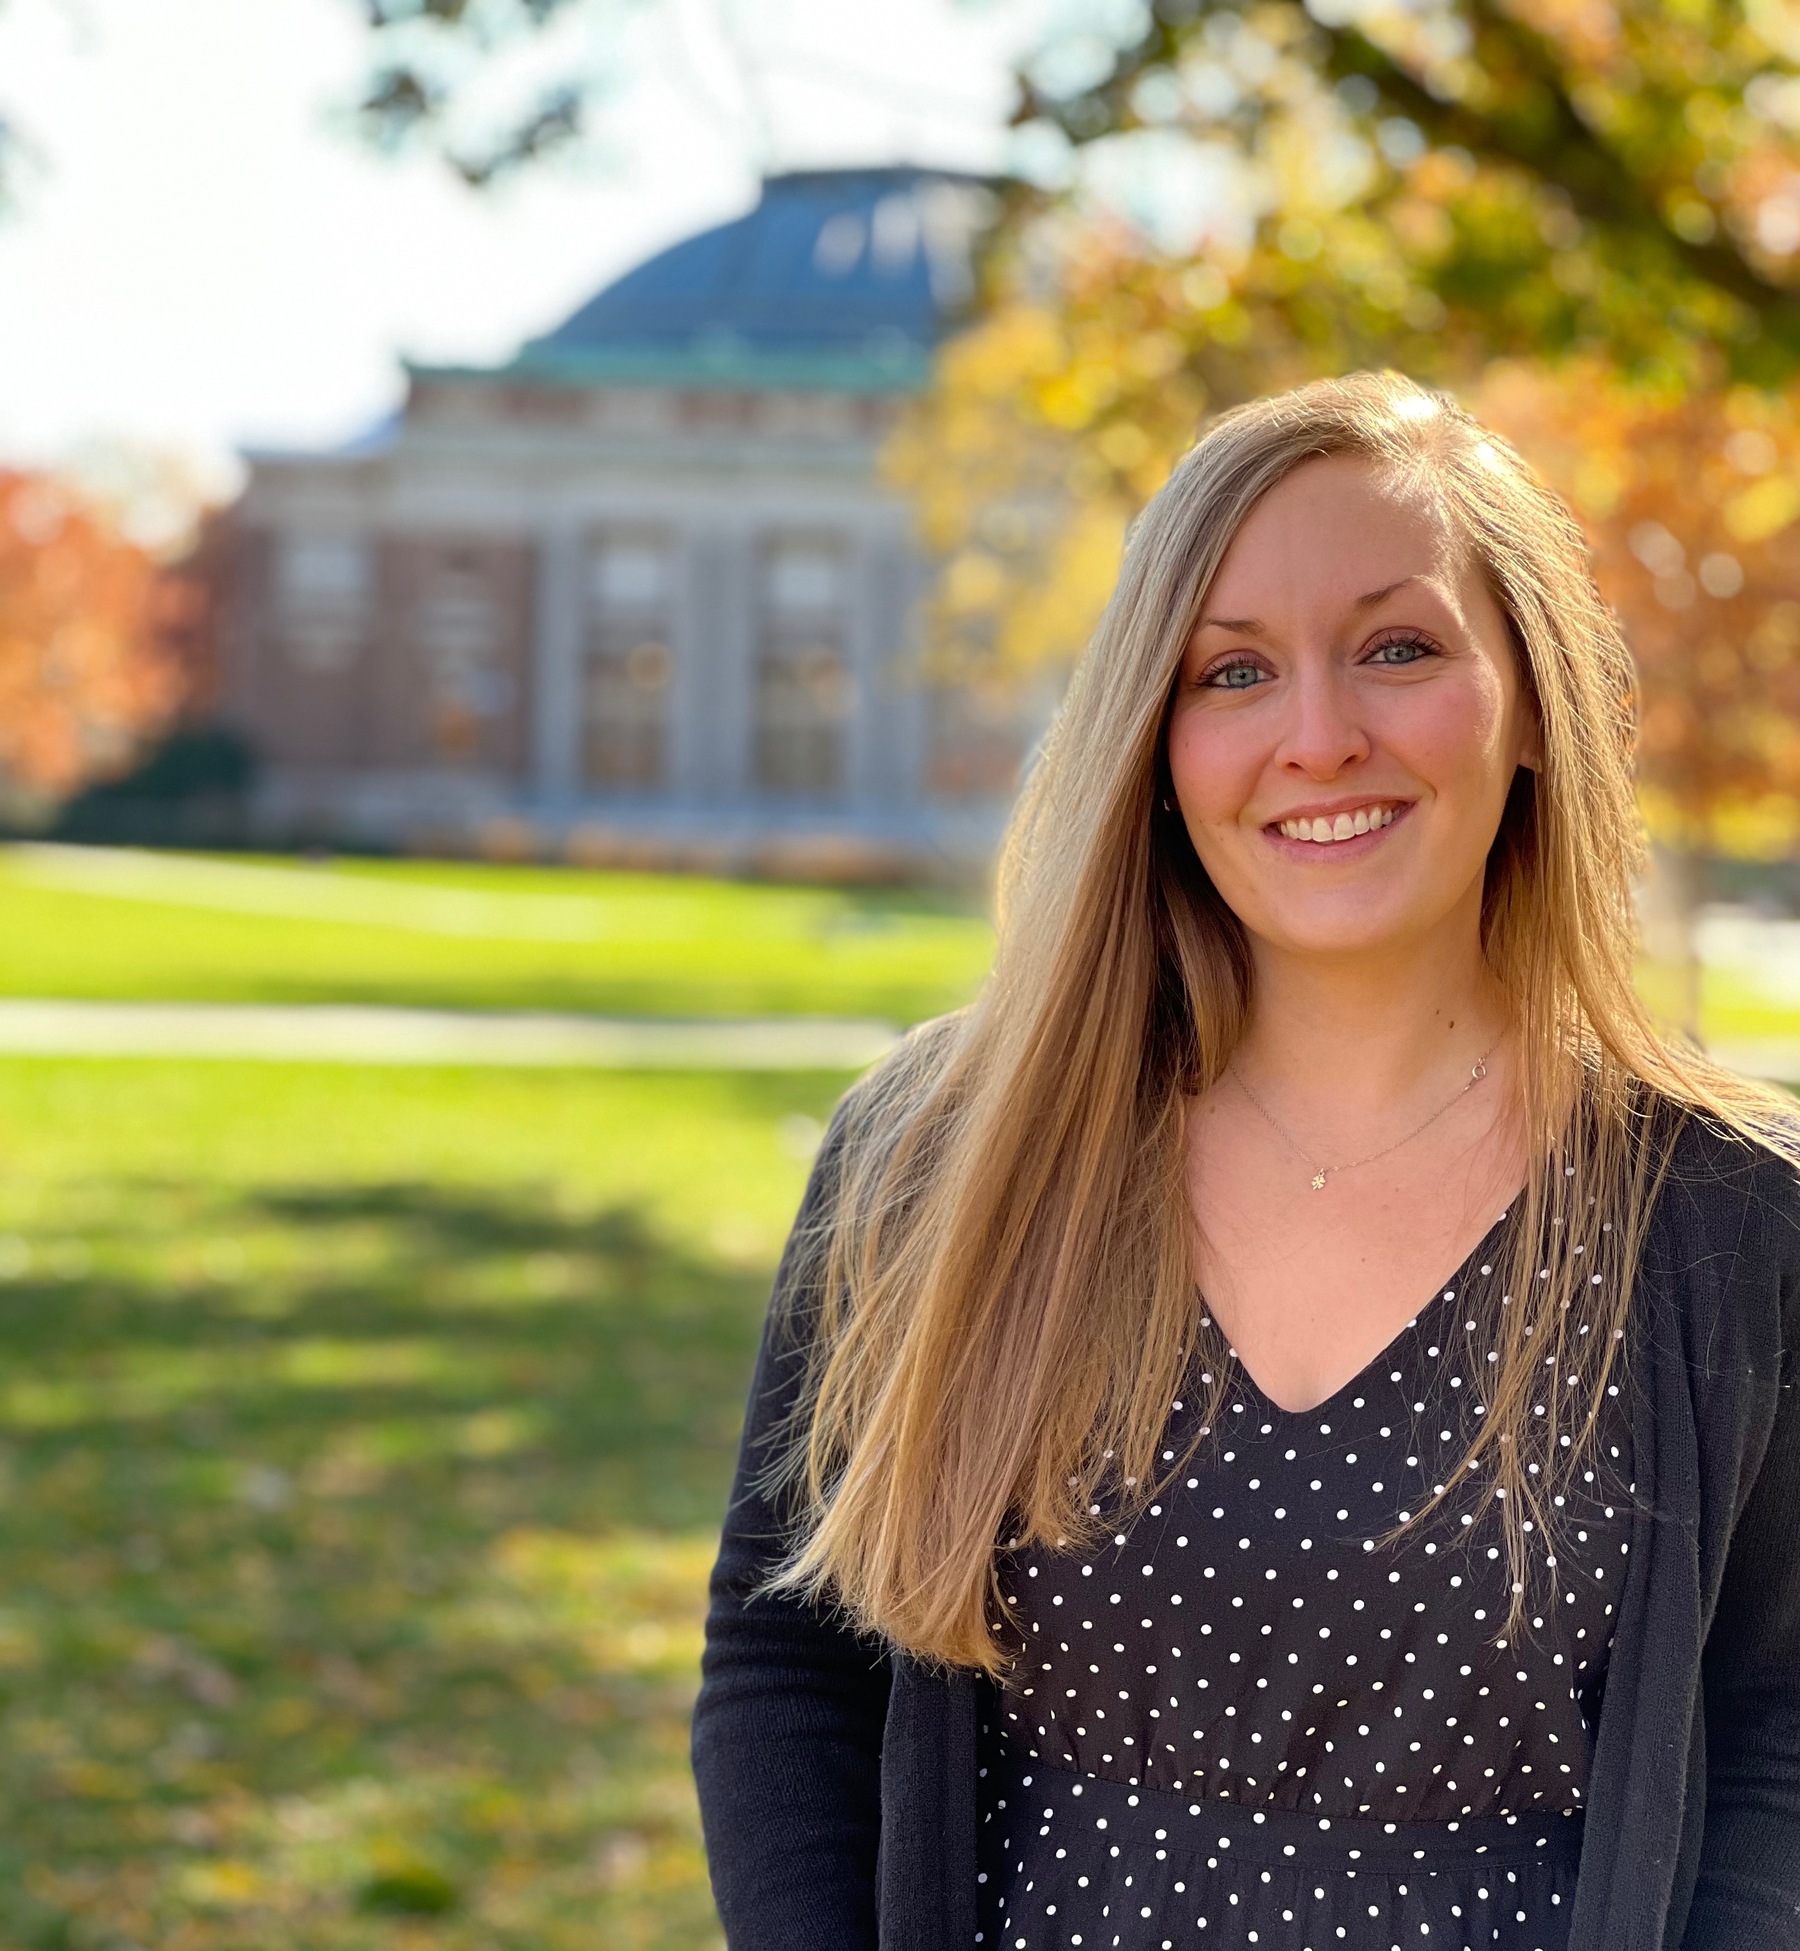 Haley Skymba smiles for a photograph against the backdrop of Foellinger Auditorium.